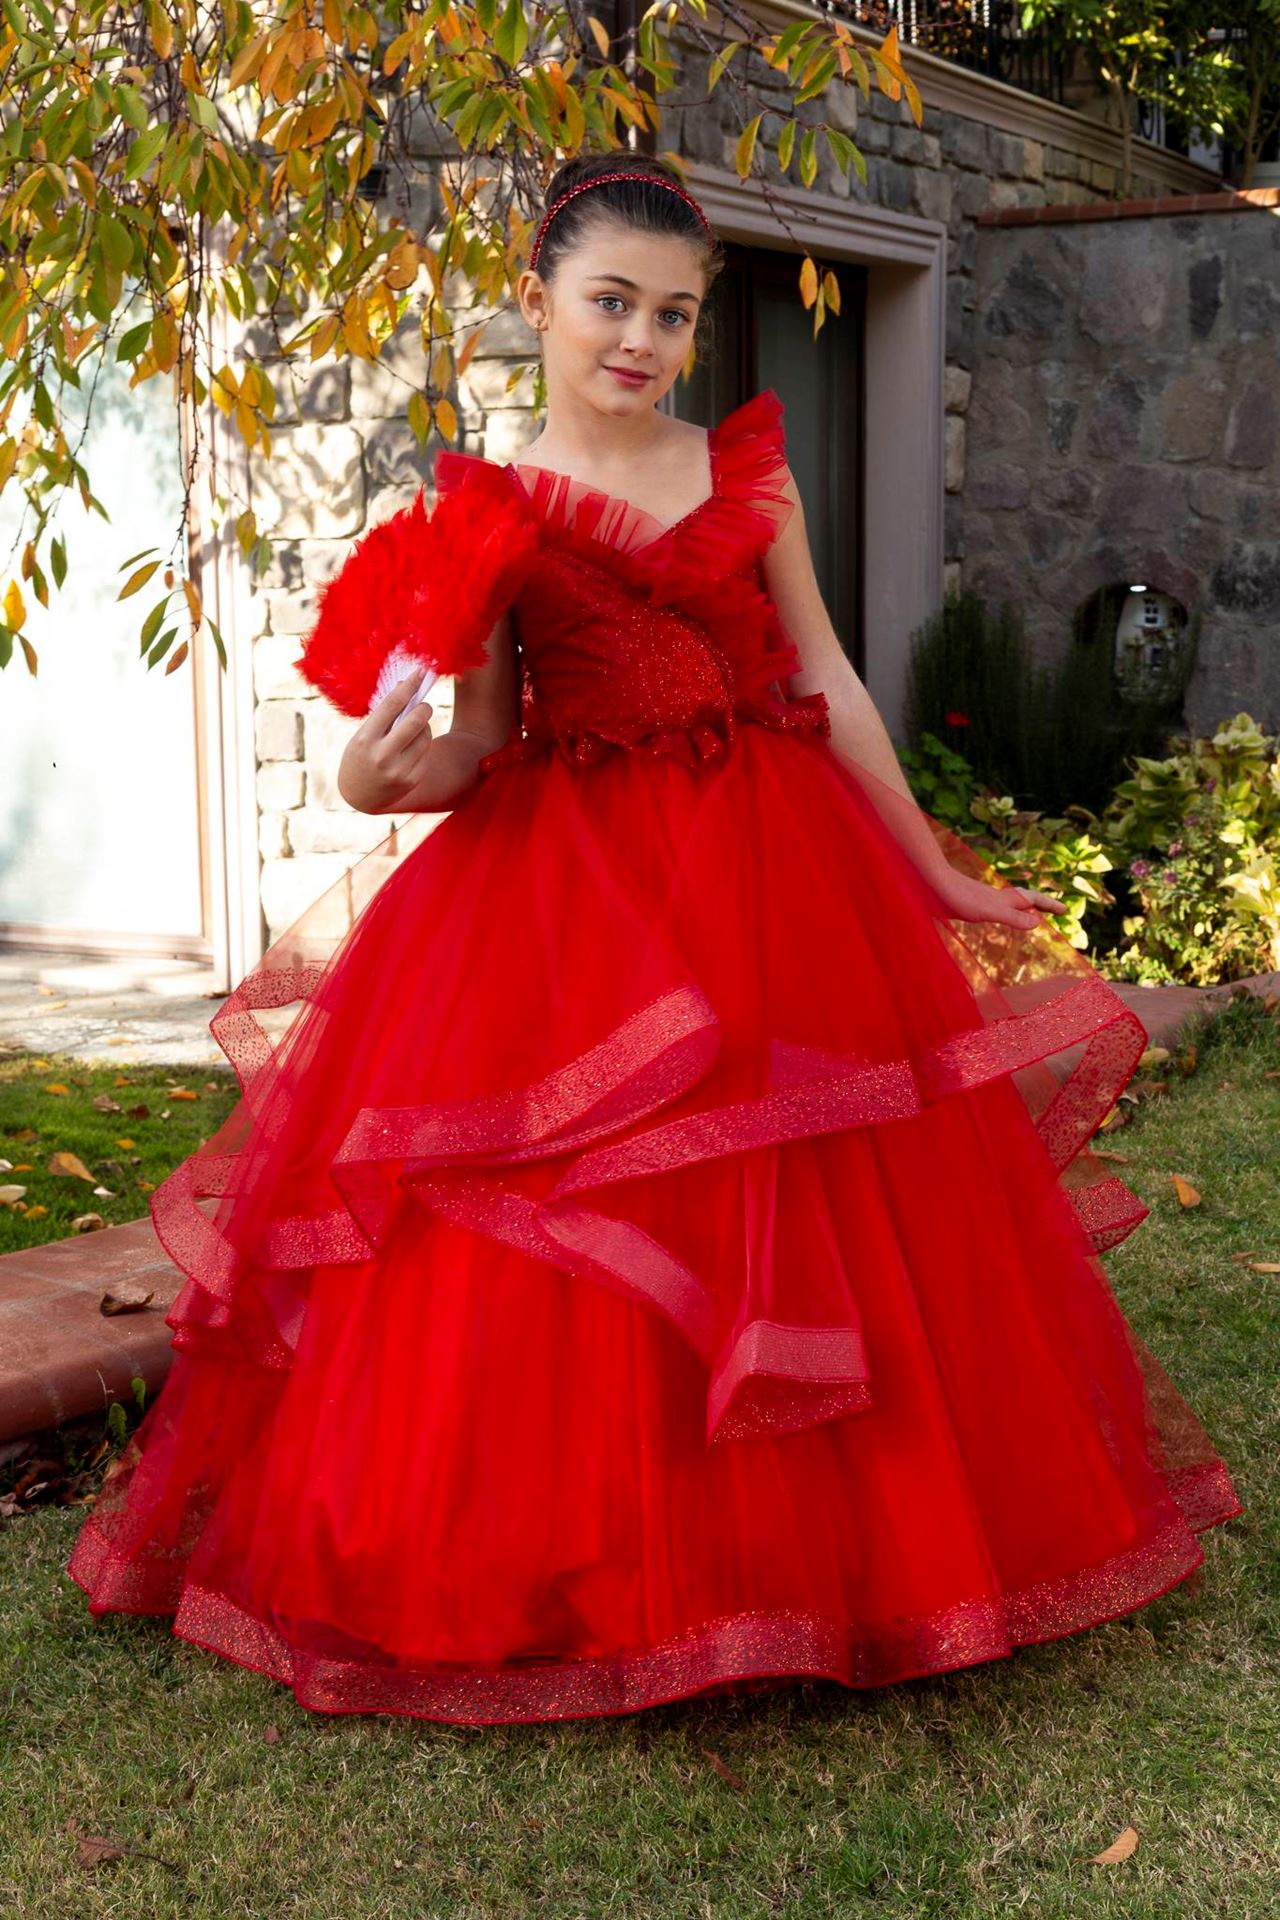 Belle 7-11 Years Old Girl Dress 30081 Red